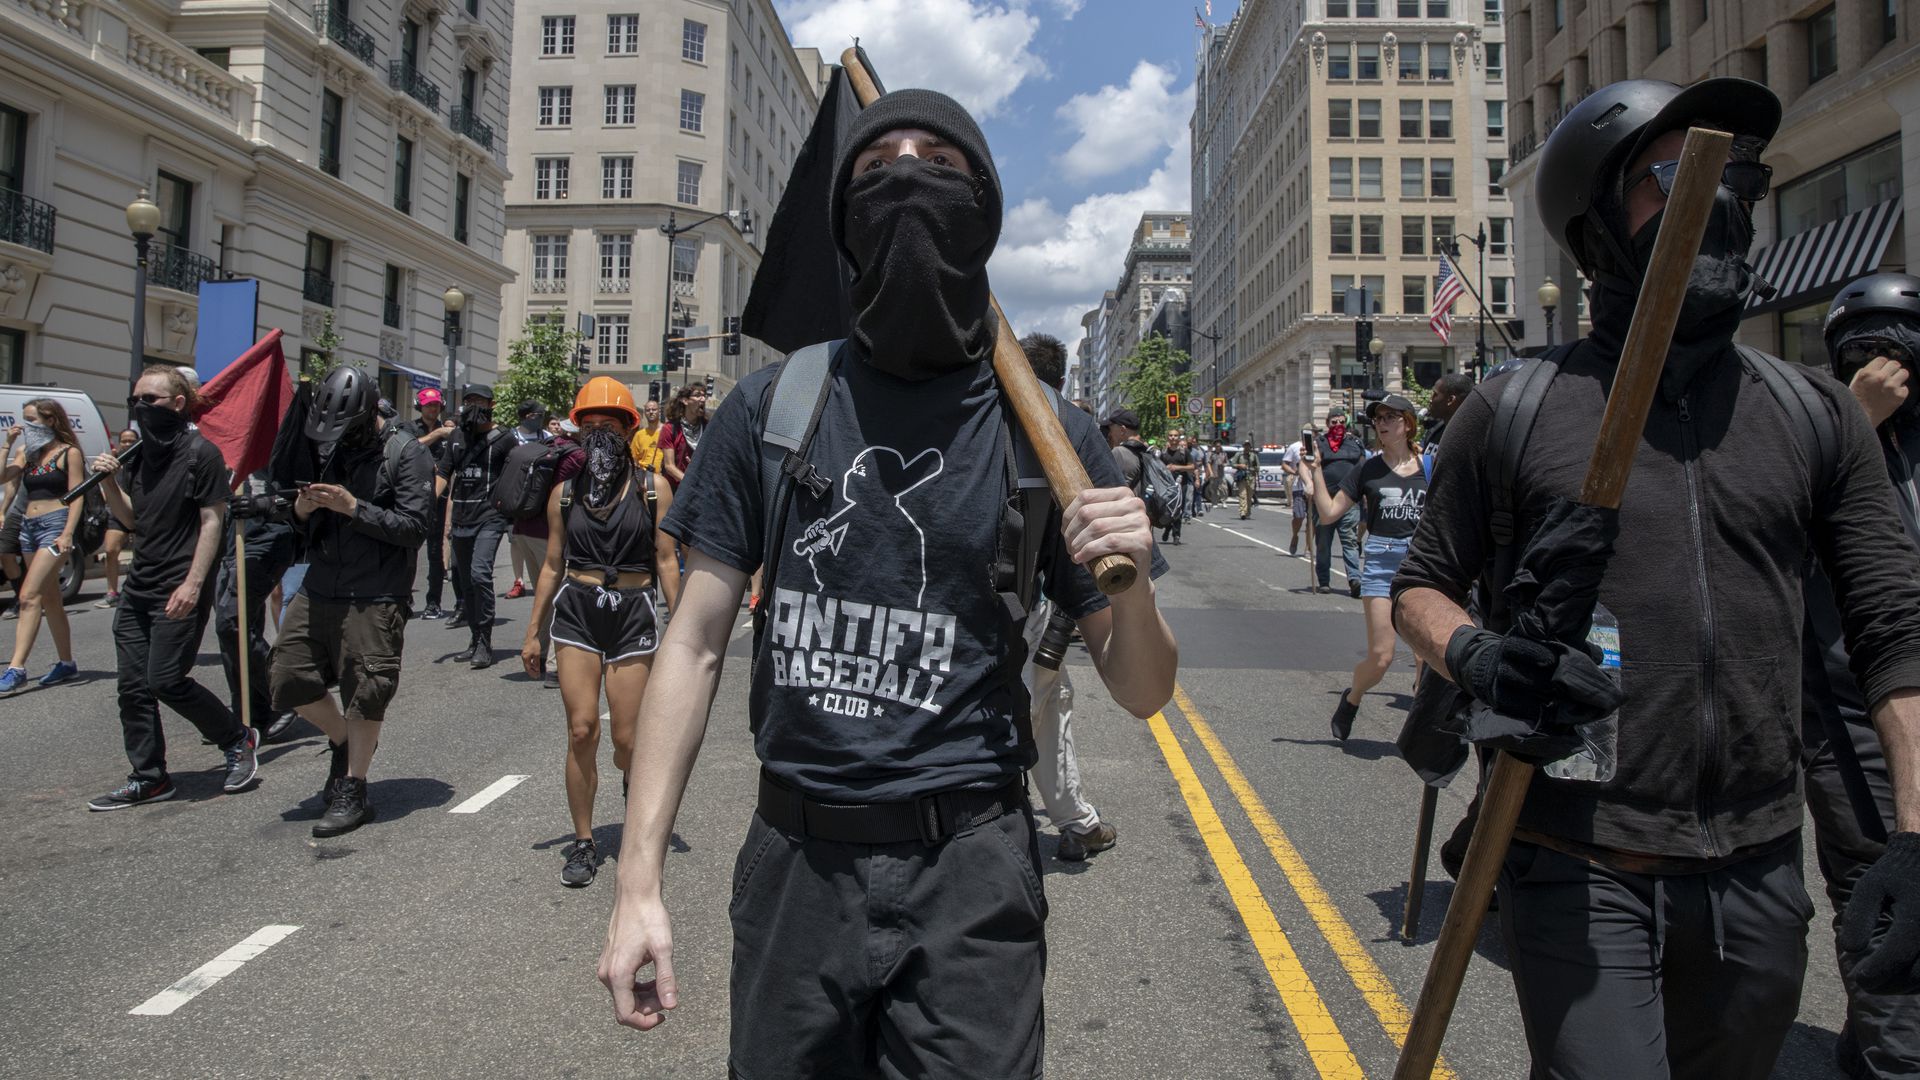 Antifa marching with clubs